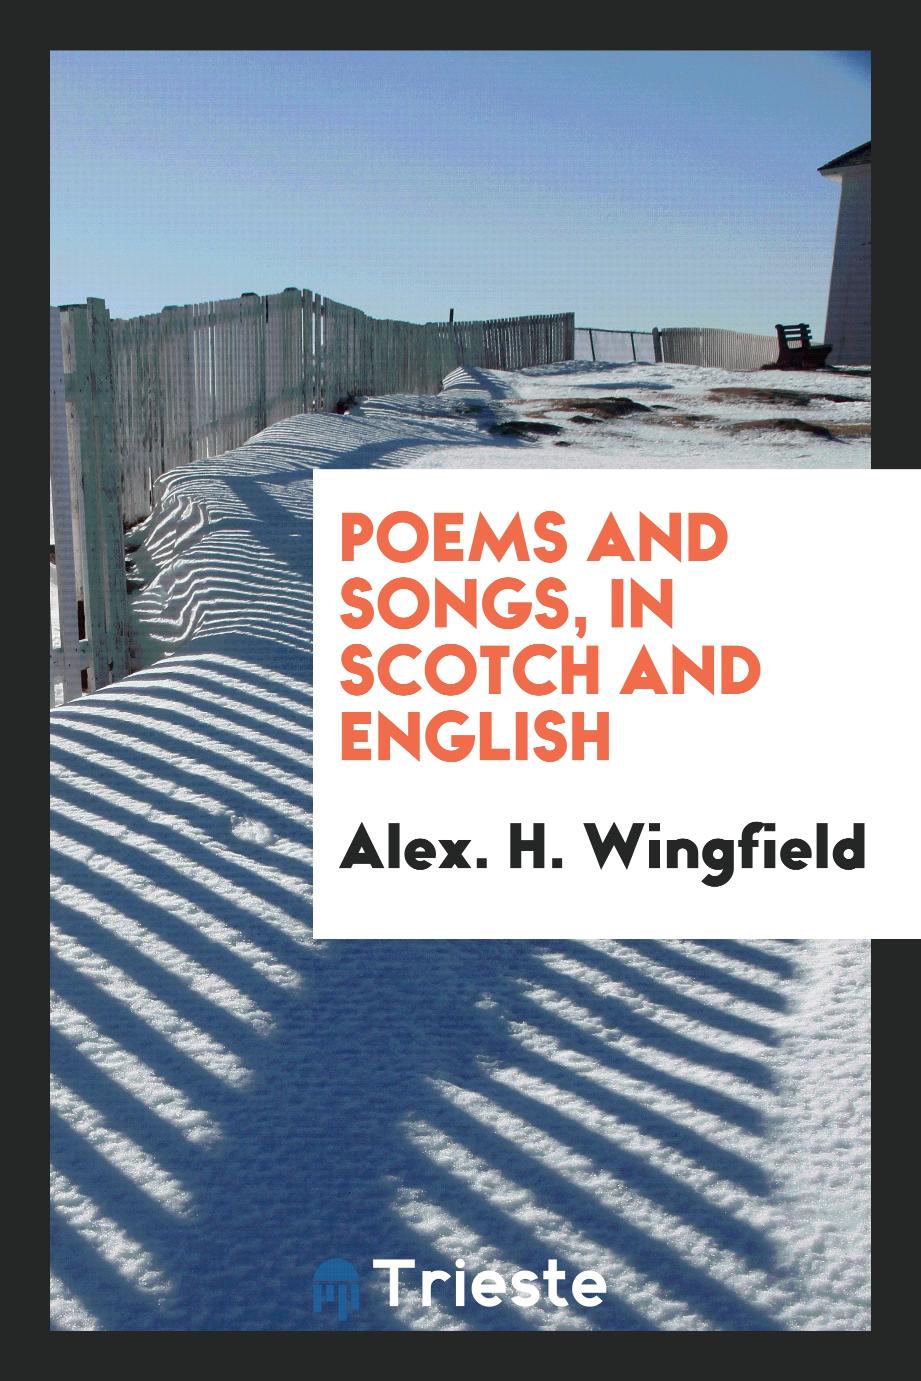 Poems and songs, in Scotch and English